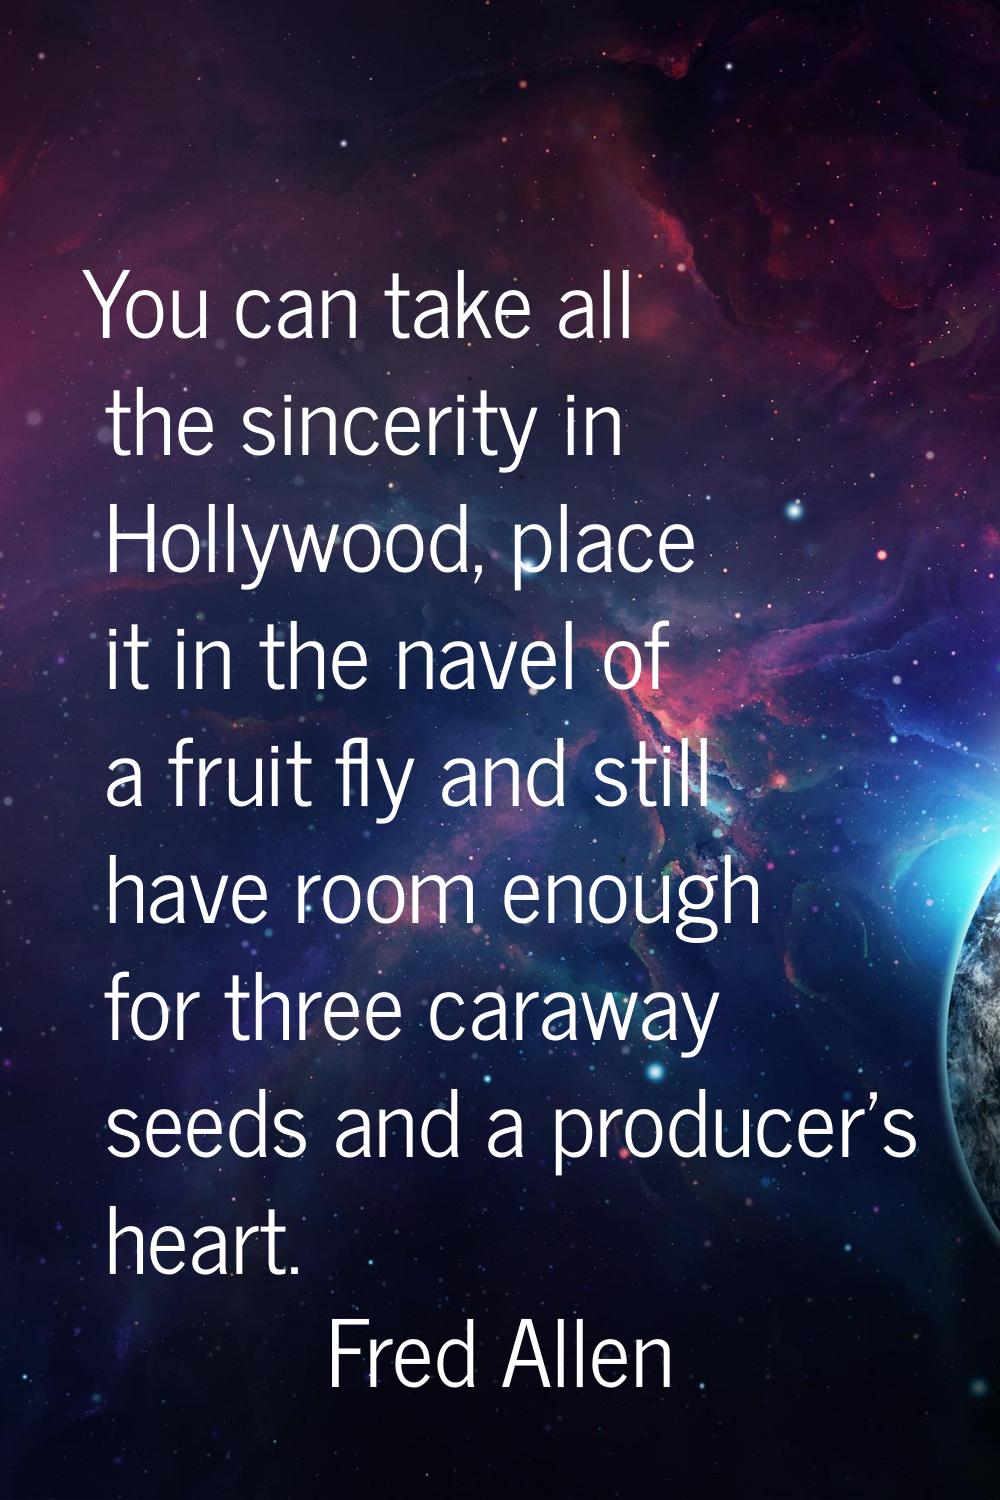 You can take all the sincerity in Hollywood, place it in the navel of a fruit fly and still have ro